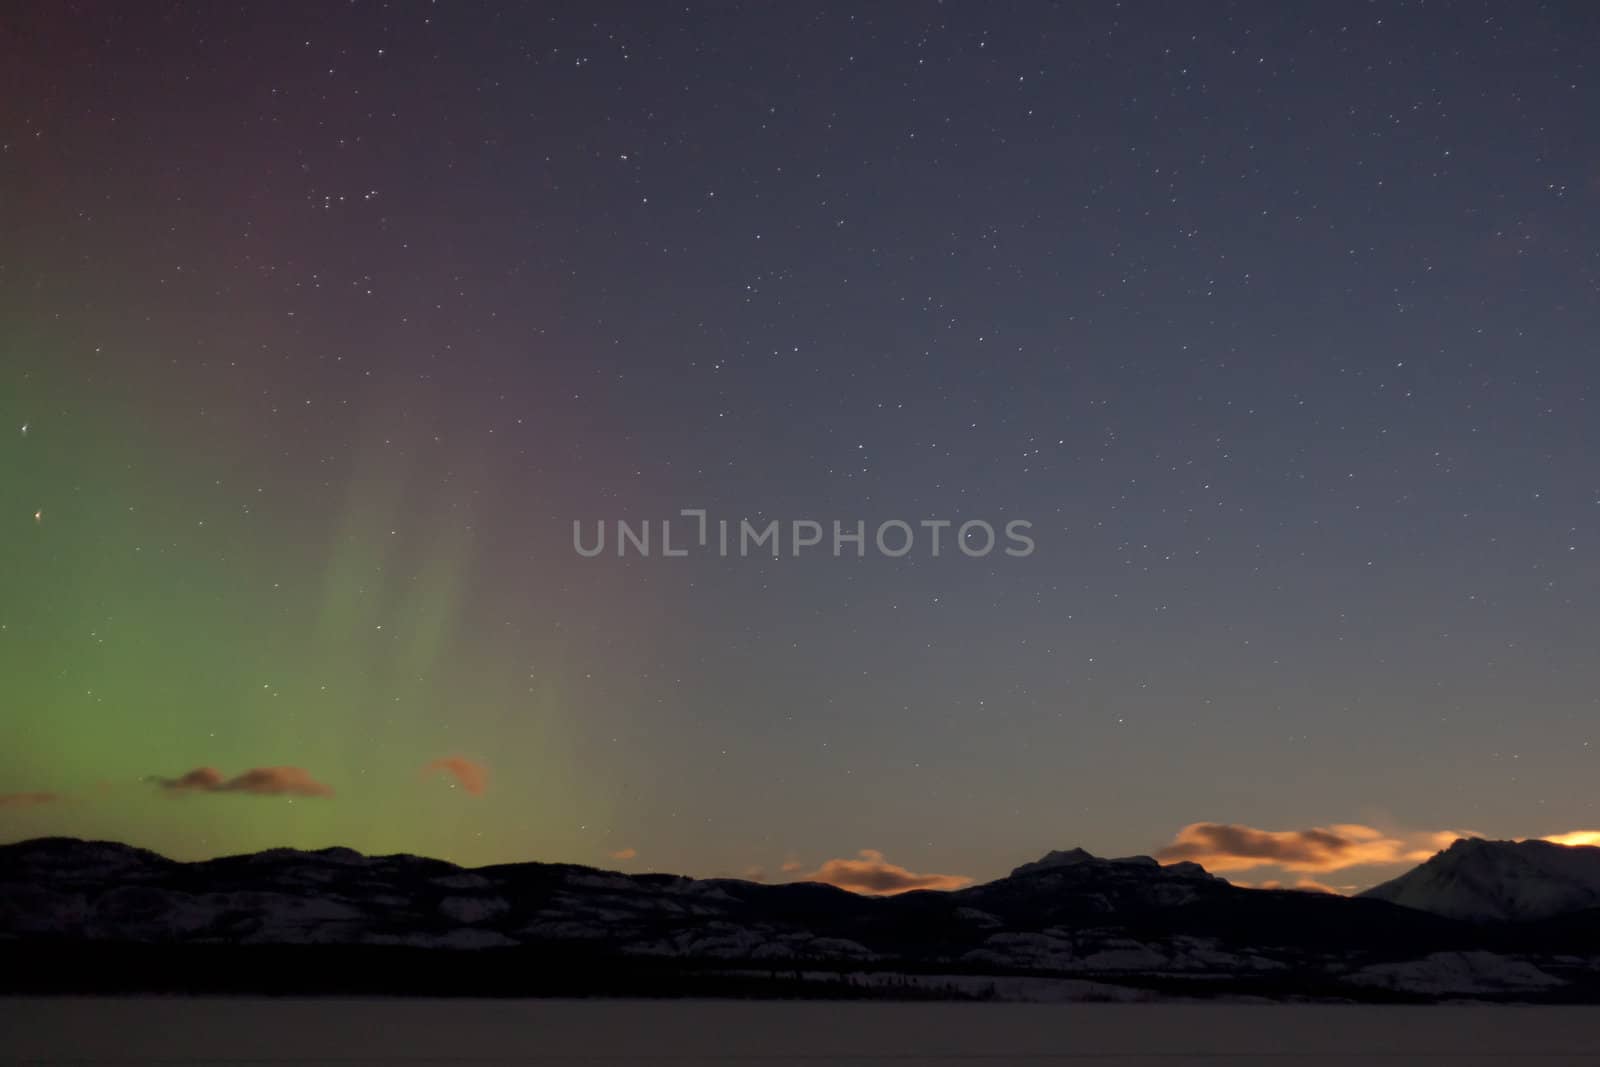 Northern lights (aurora borealis) and rising moon above and behind snowy mountain range in winter.